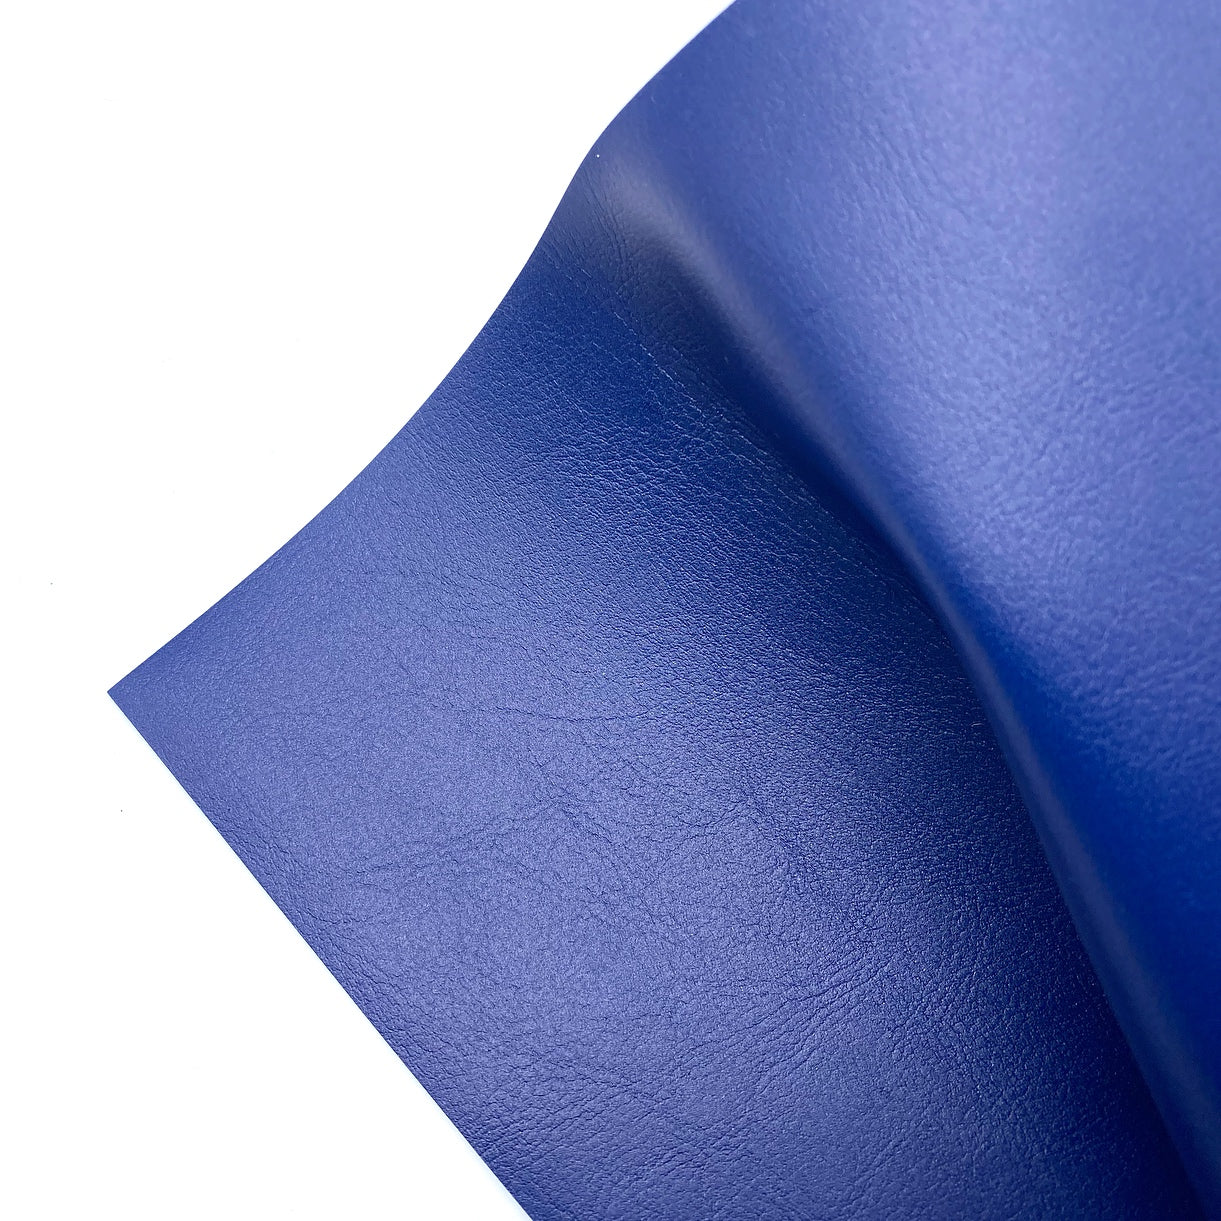 It’s all Navy Core Premium Faux Leather Fabric Sheets